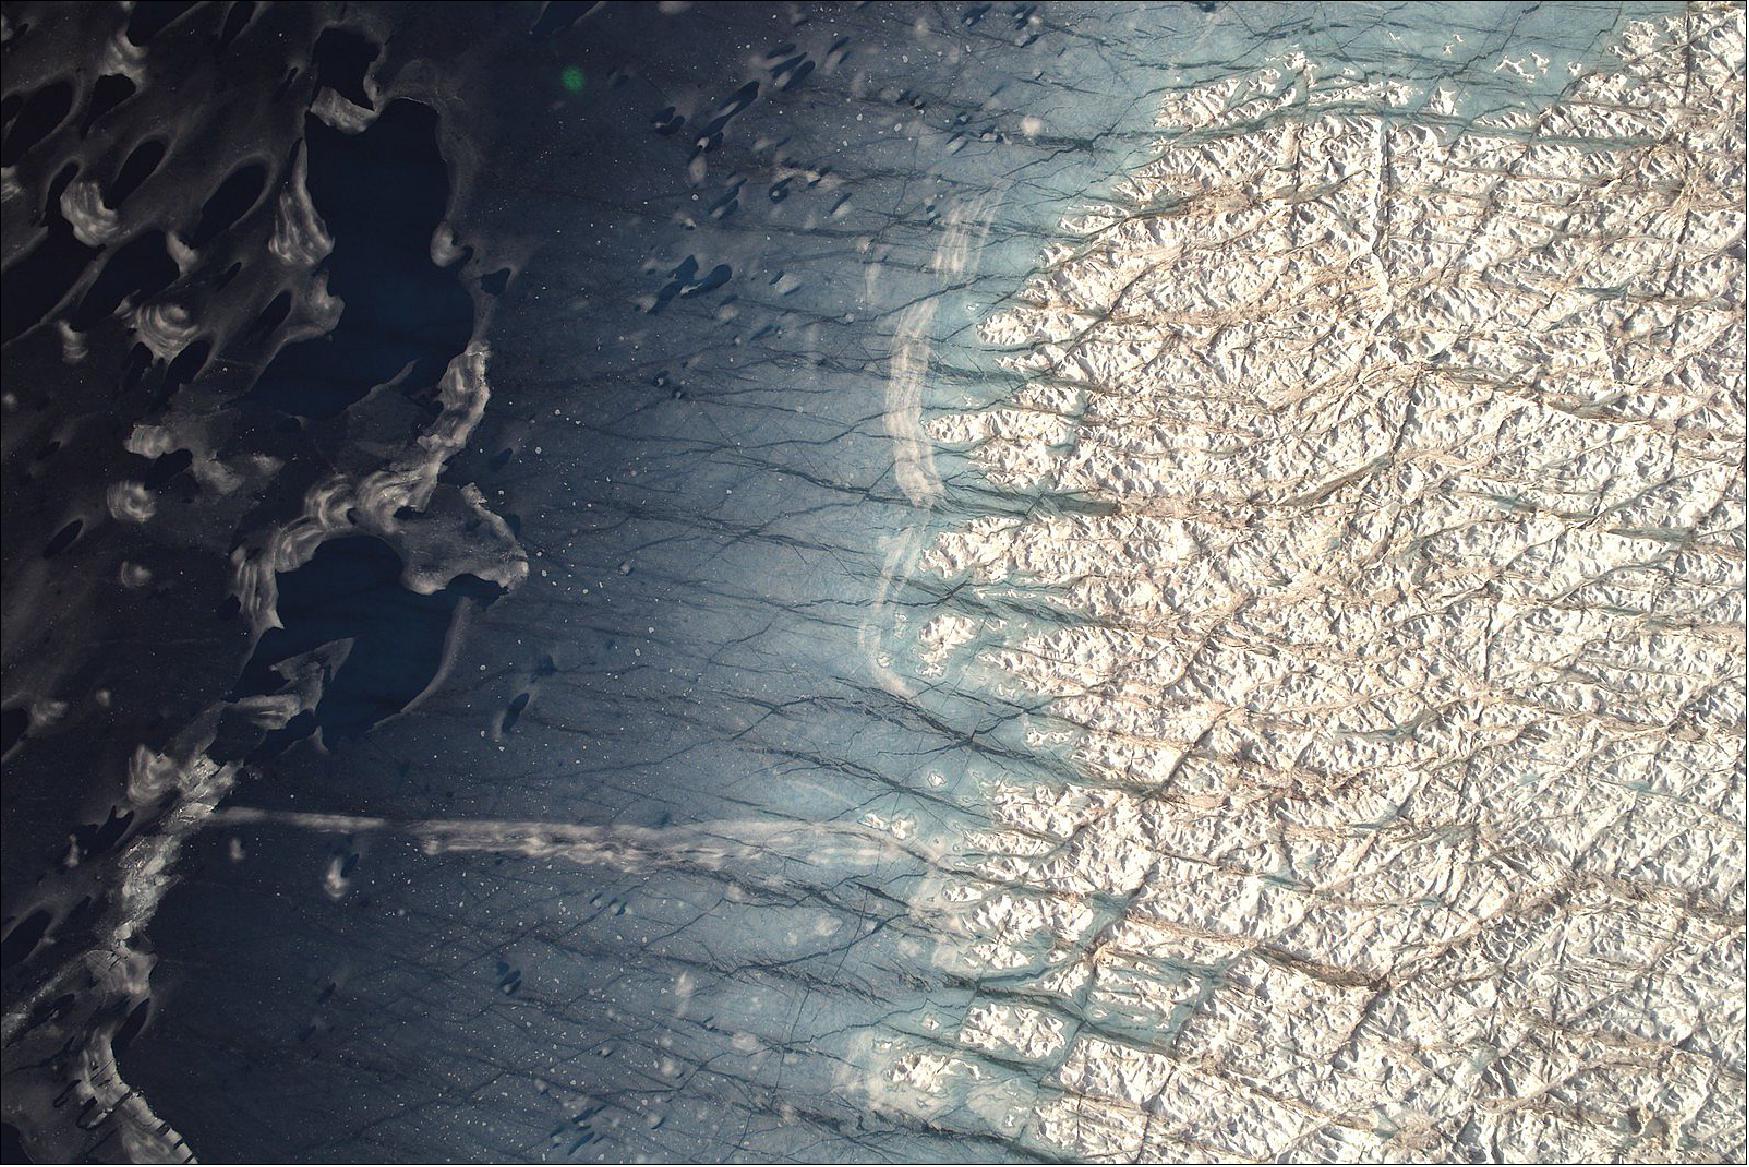 Figure 3: The shores of a refreezing lake on the surface of Zachariæ Isstrøm in northeast Greenland (image credit: NASA, Jeremy Harbeck)